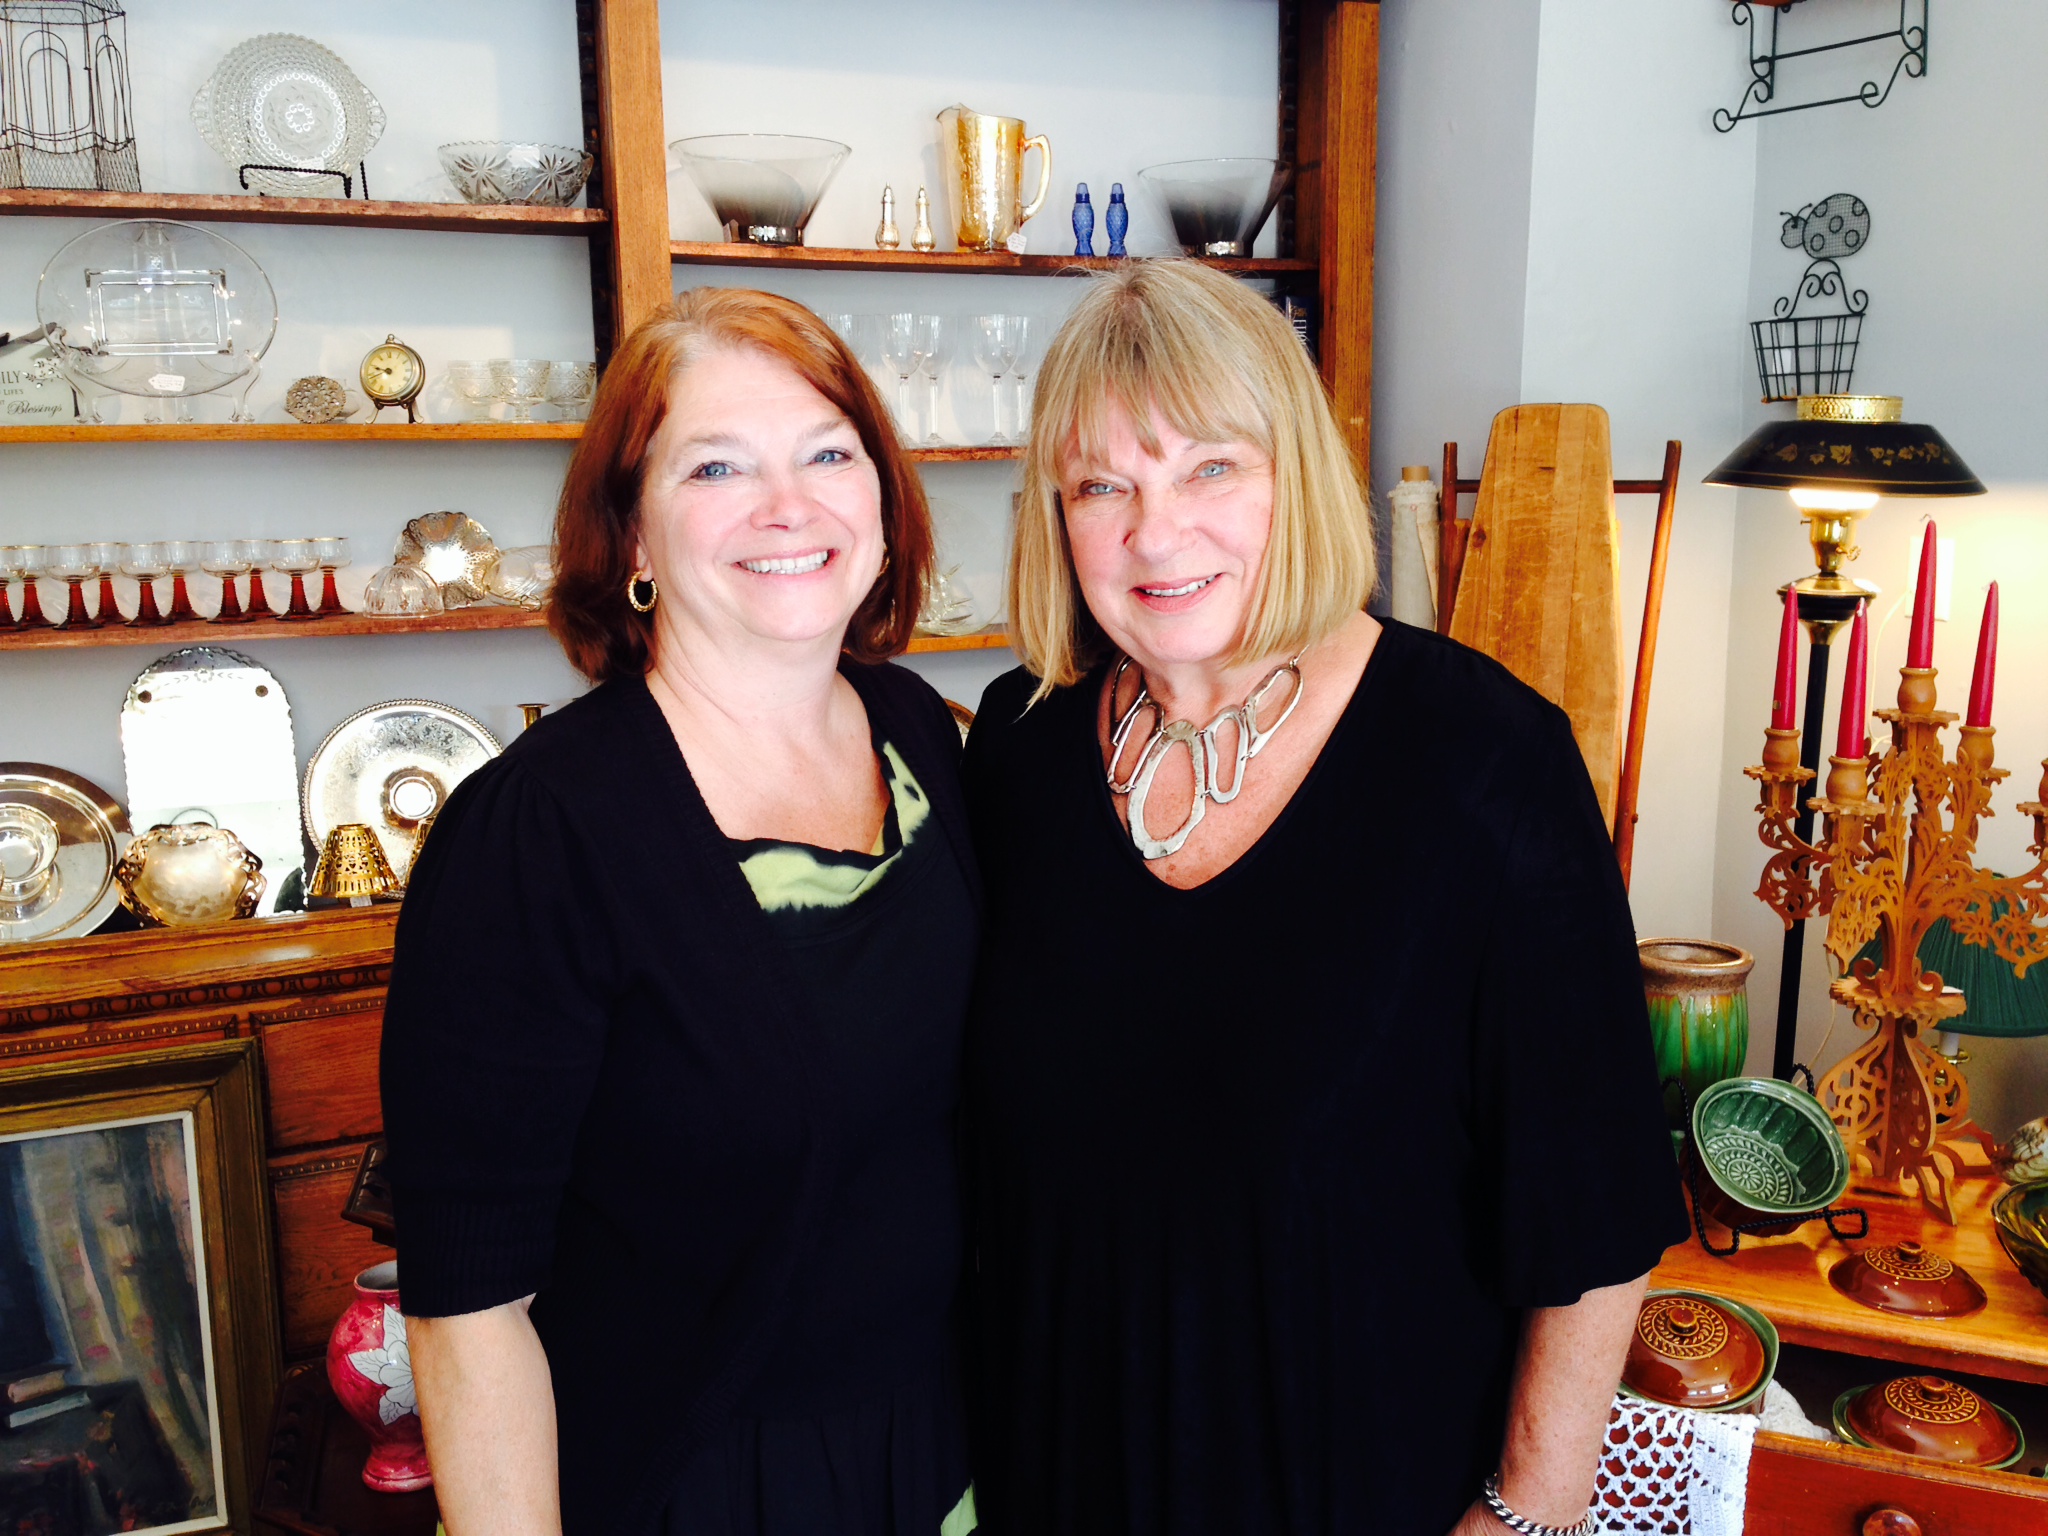 From left, Sherry Kancs and Dace Abeltins have opened Pebbles to Pearls Boutique in Westfield.